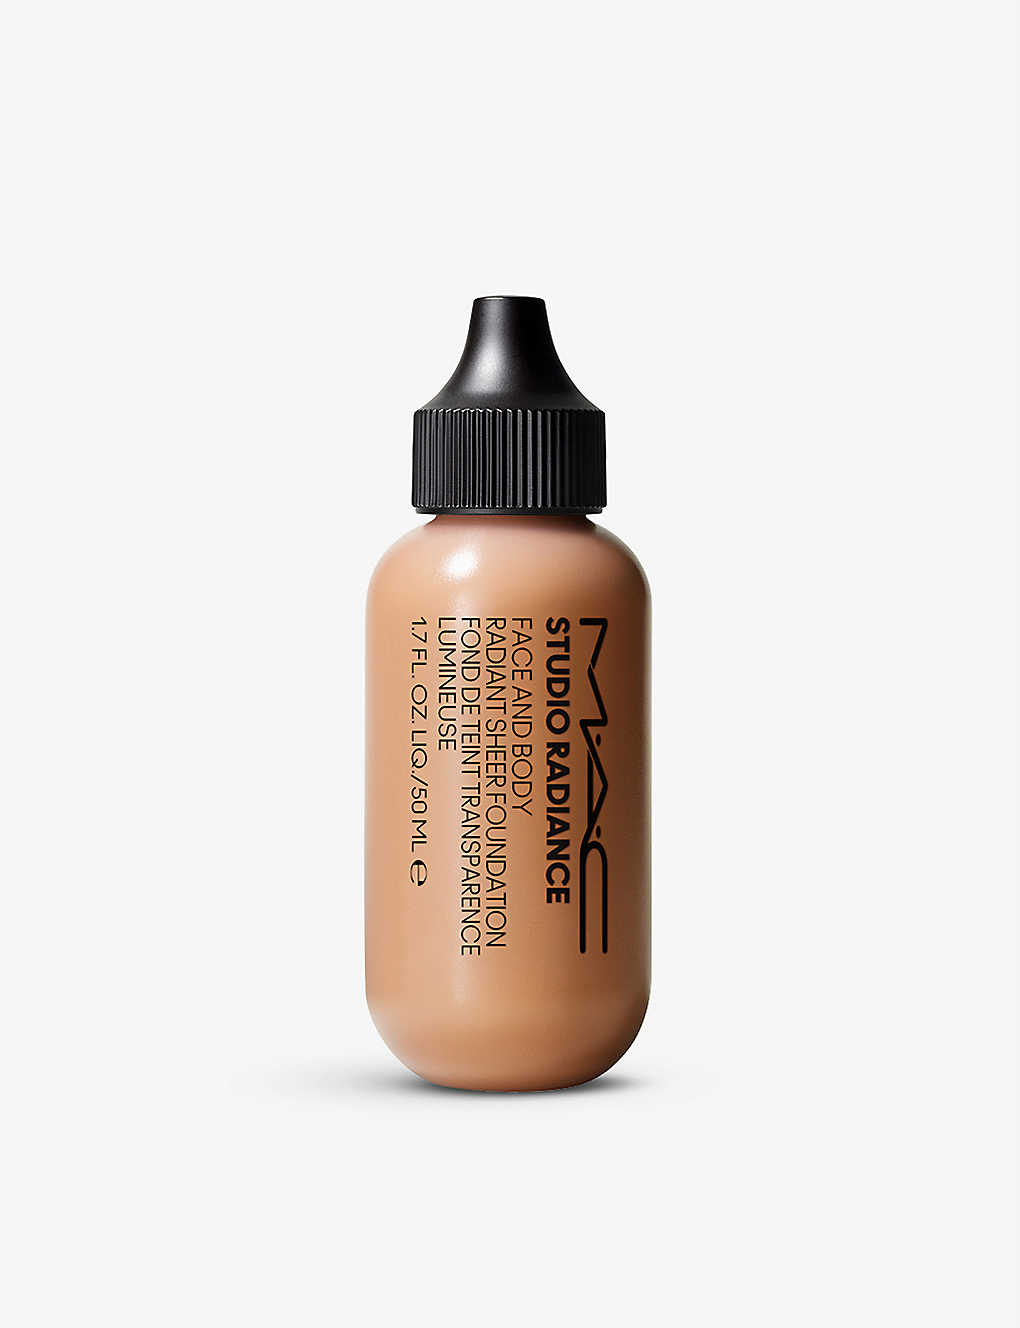 Mac Studio Radiance Face And Body Radiant Sheer Foundation 50ml In N3